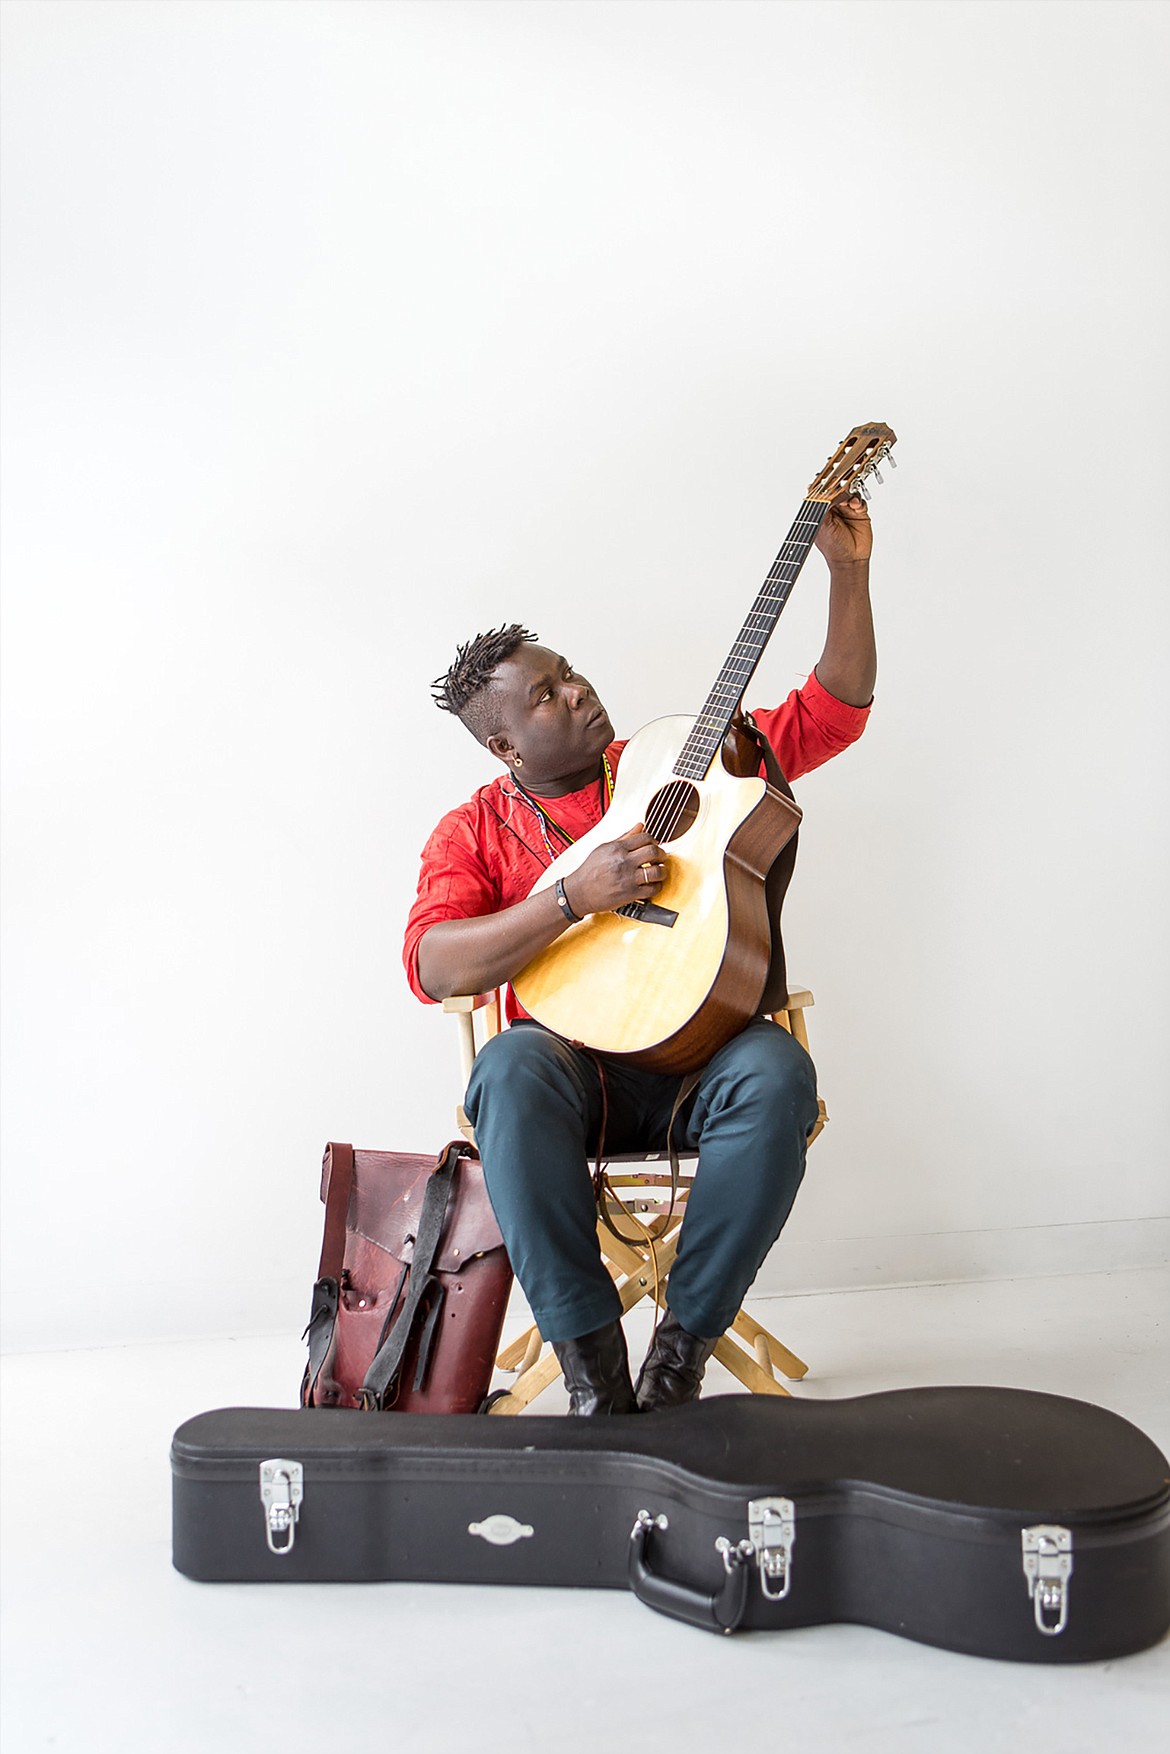 Okaidja and his band will perform their high-energy, infectious music and dance on Thursday, October 28 at 7:30 p.m. at the O’Shaughnessy Center in Whitefish